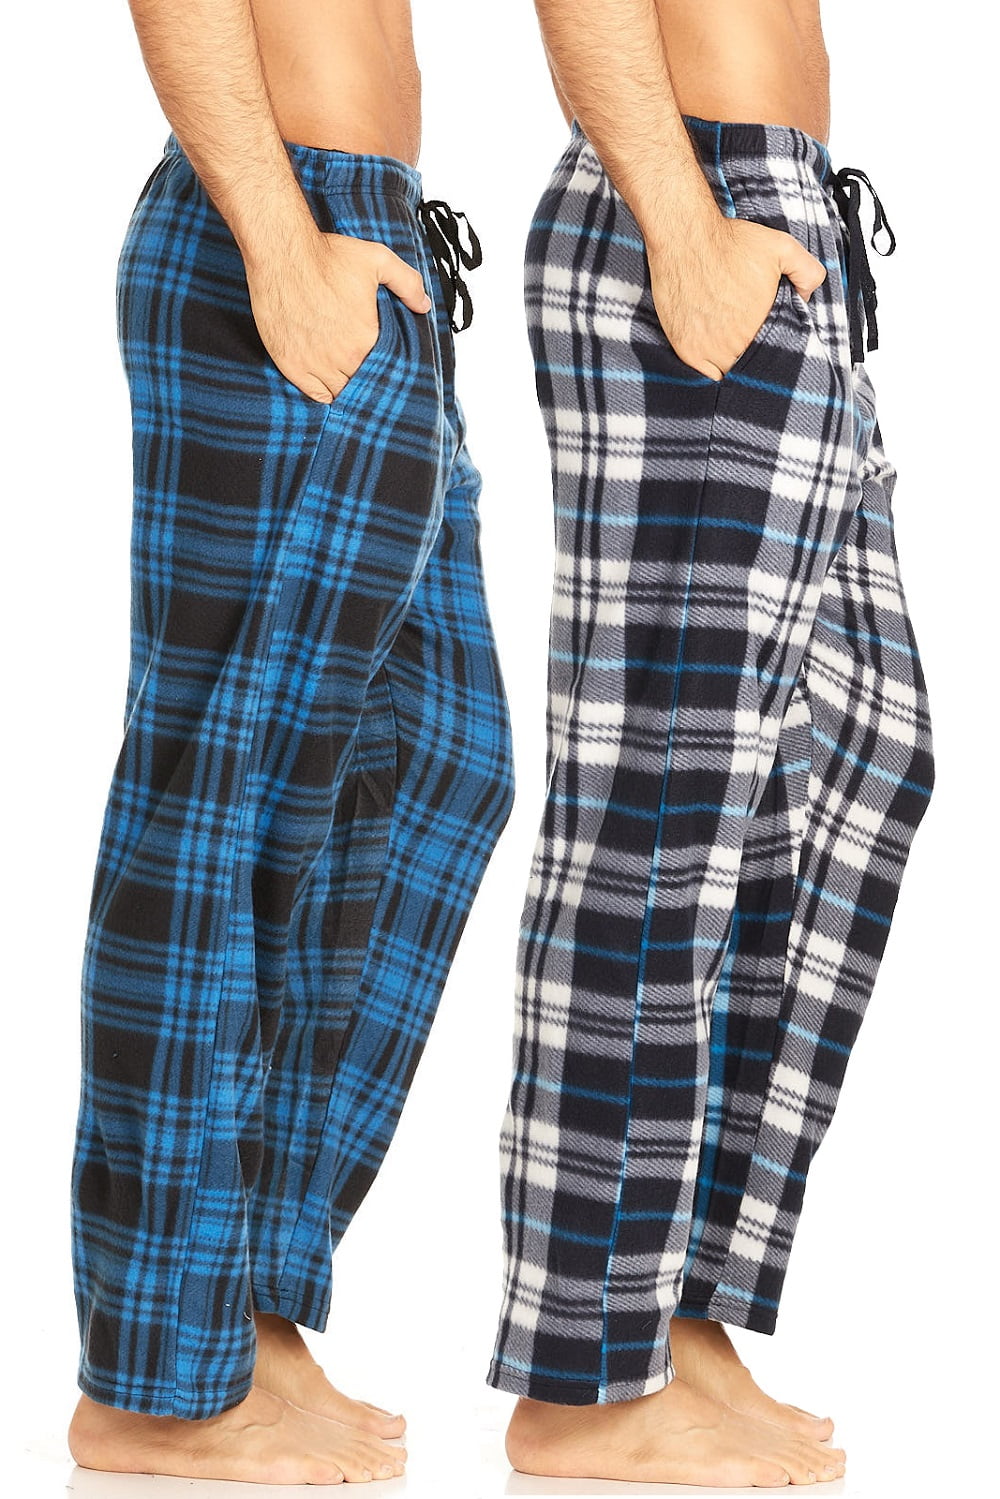 2 Pack of Men’s Microfleece Pajama Pants/Lounge Wear with Pockets ...